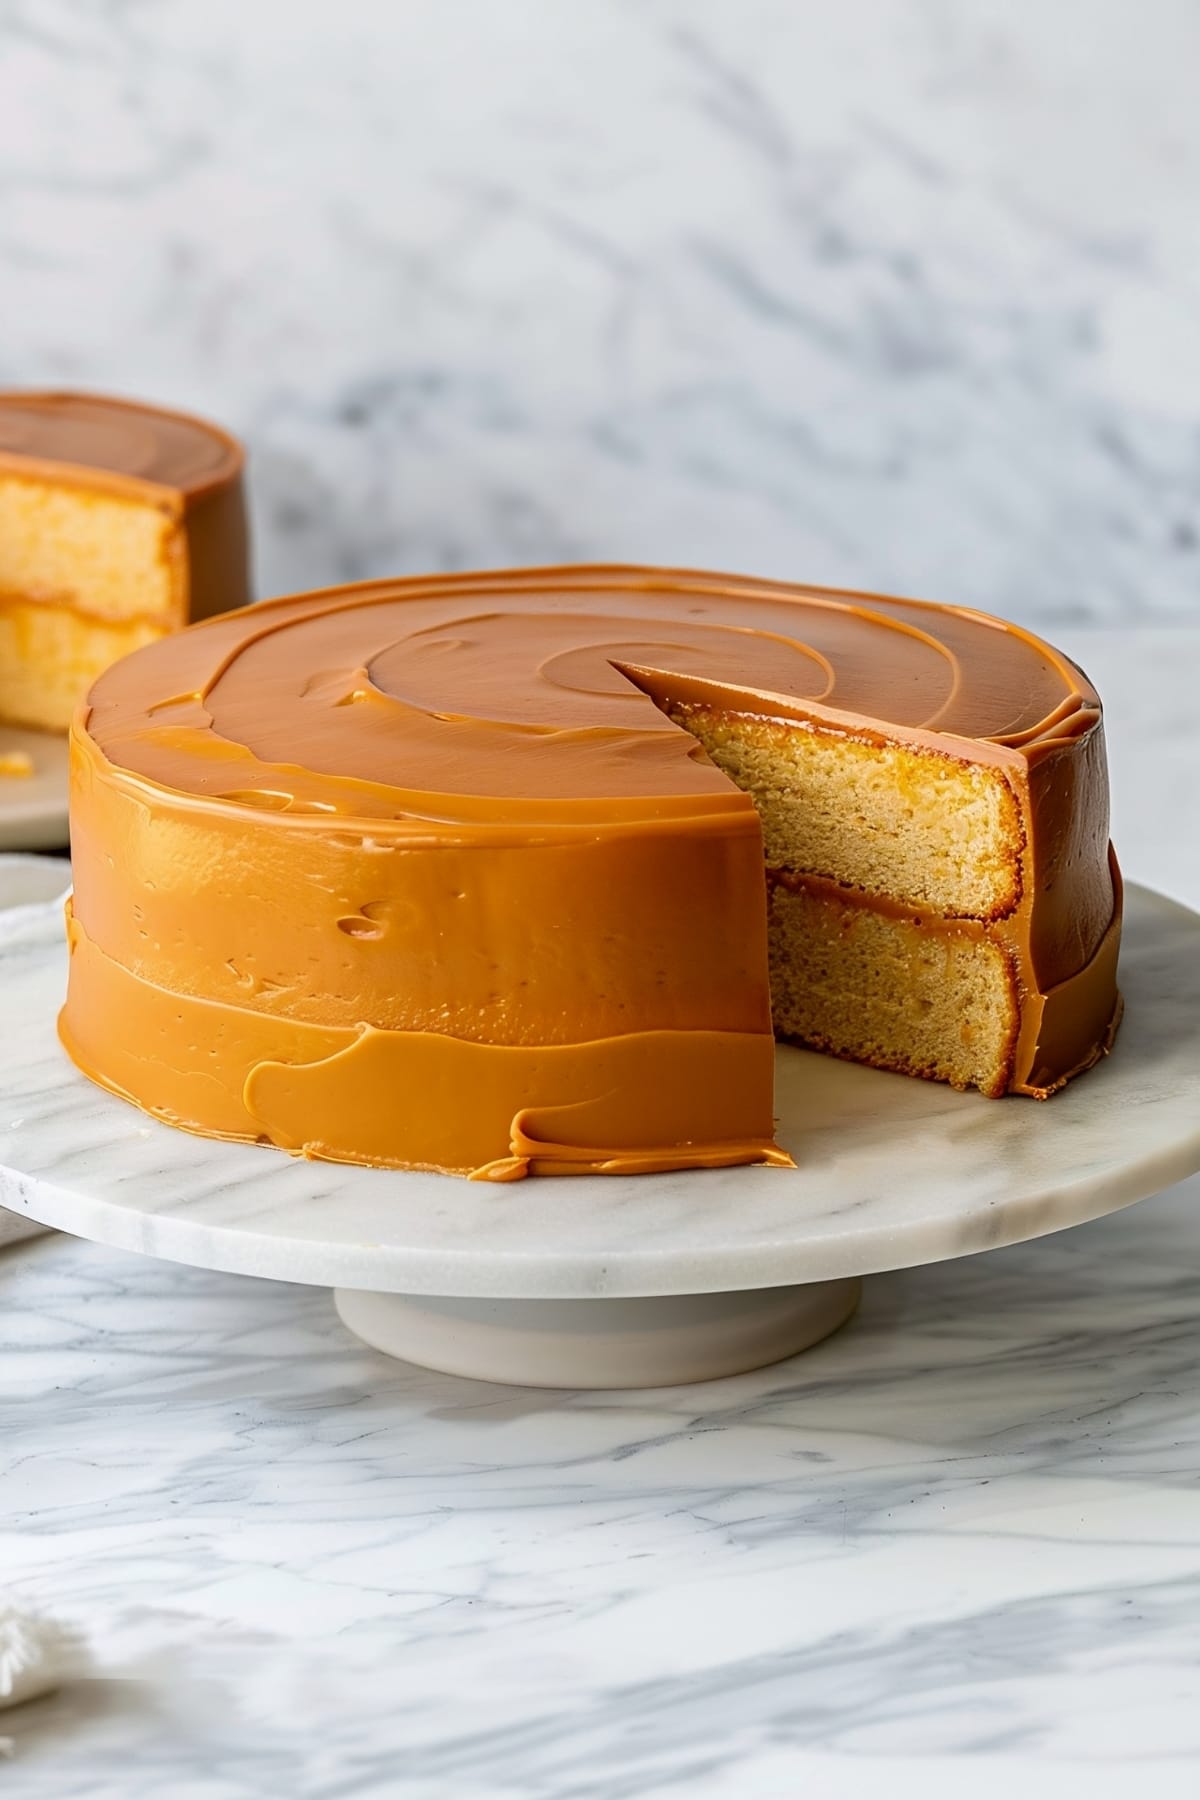 Sweet and buttery homemade southern caramel cake with a portion taken to reveal its filling